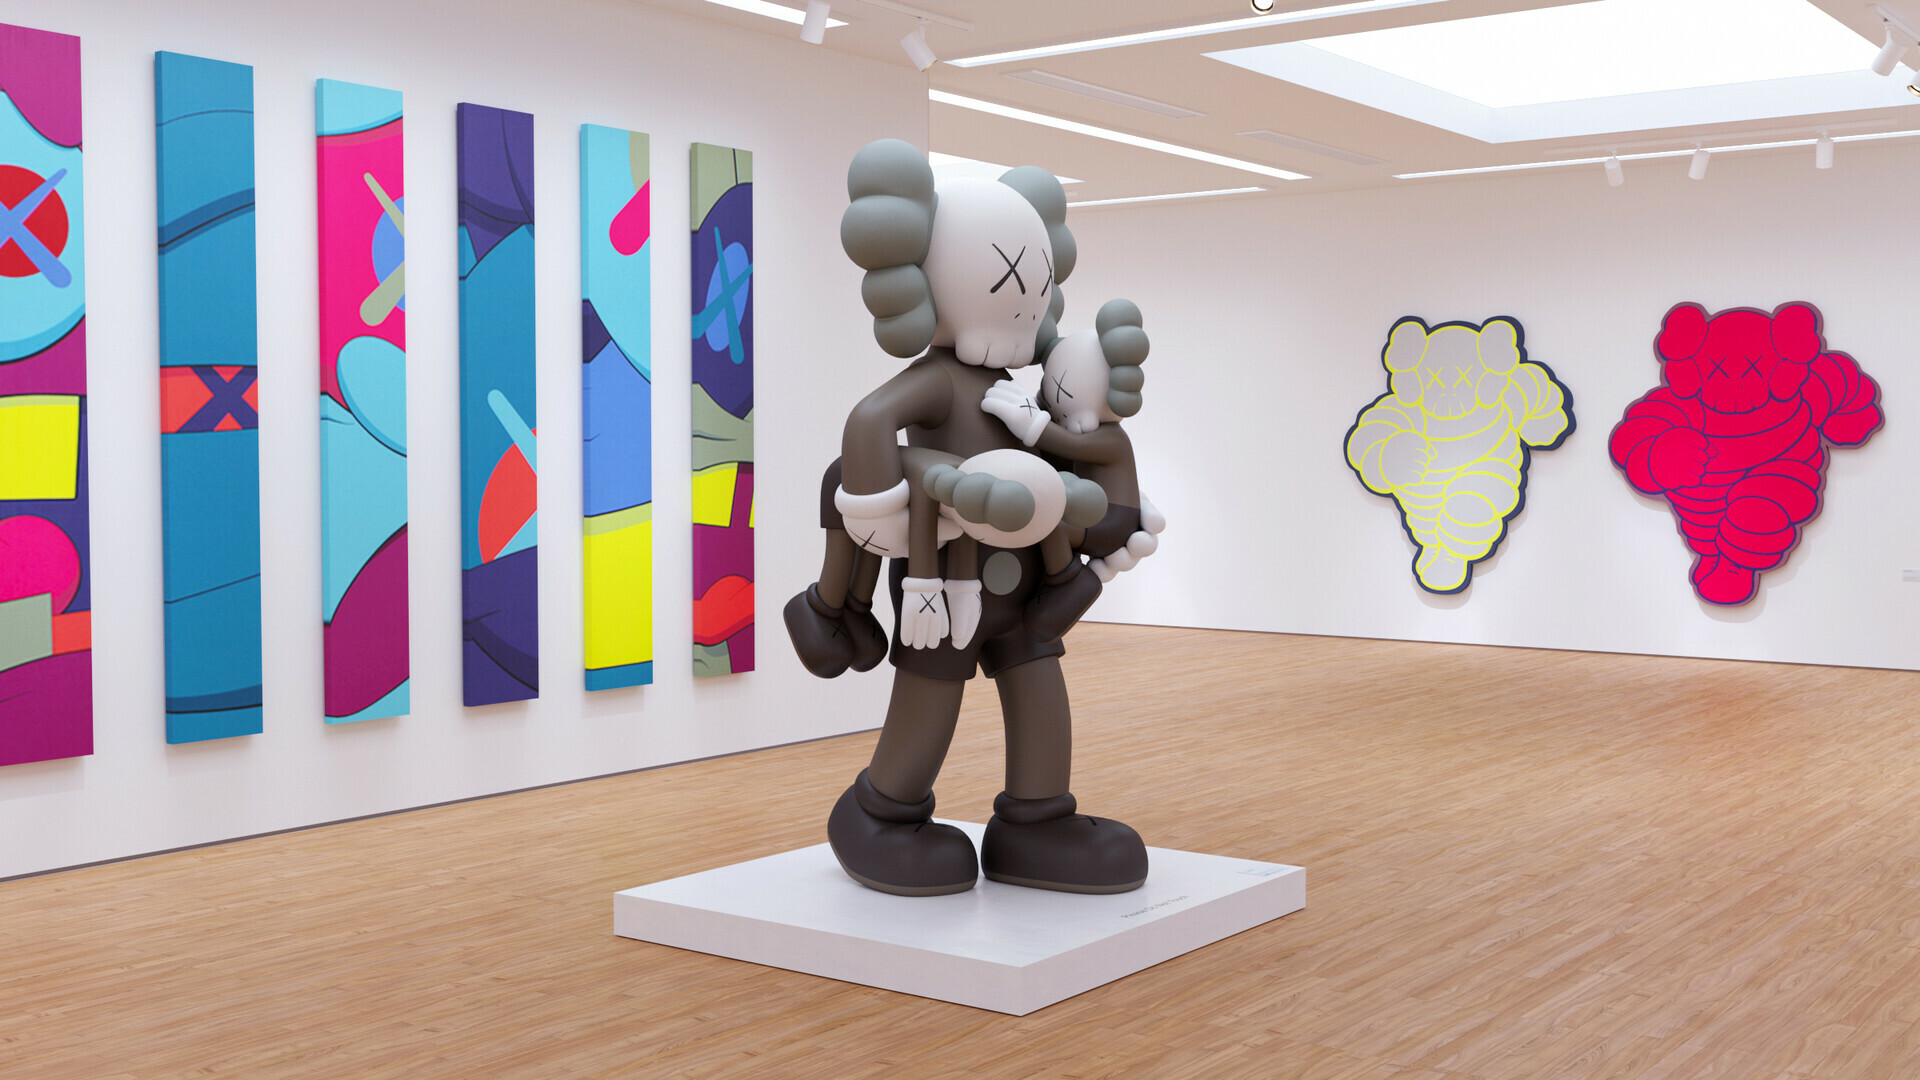 KAWS: Art exhibition, Collaborated with John Mayer to produce a collection of guitar picks in 2008. 1920x1080 Full HD Background.